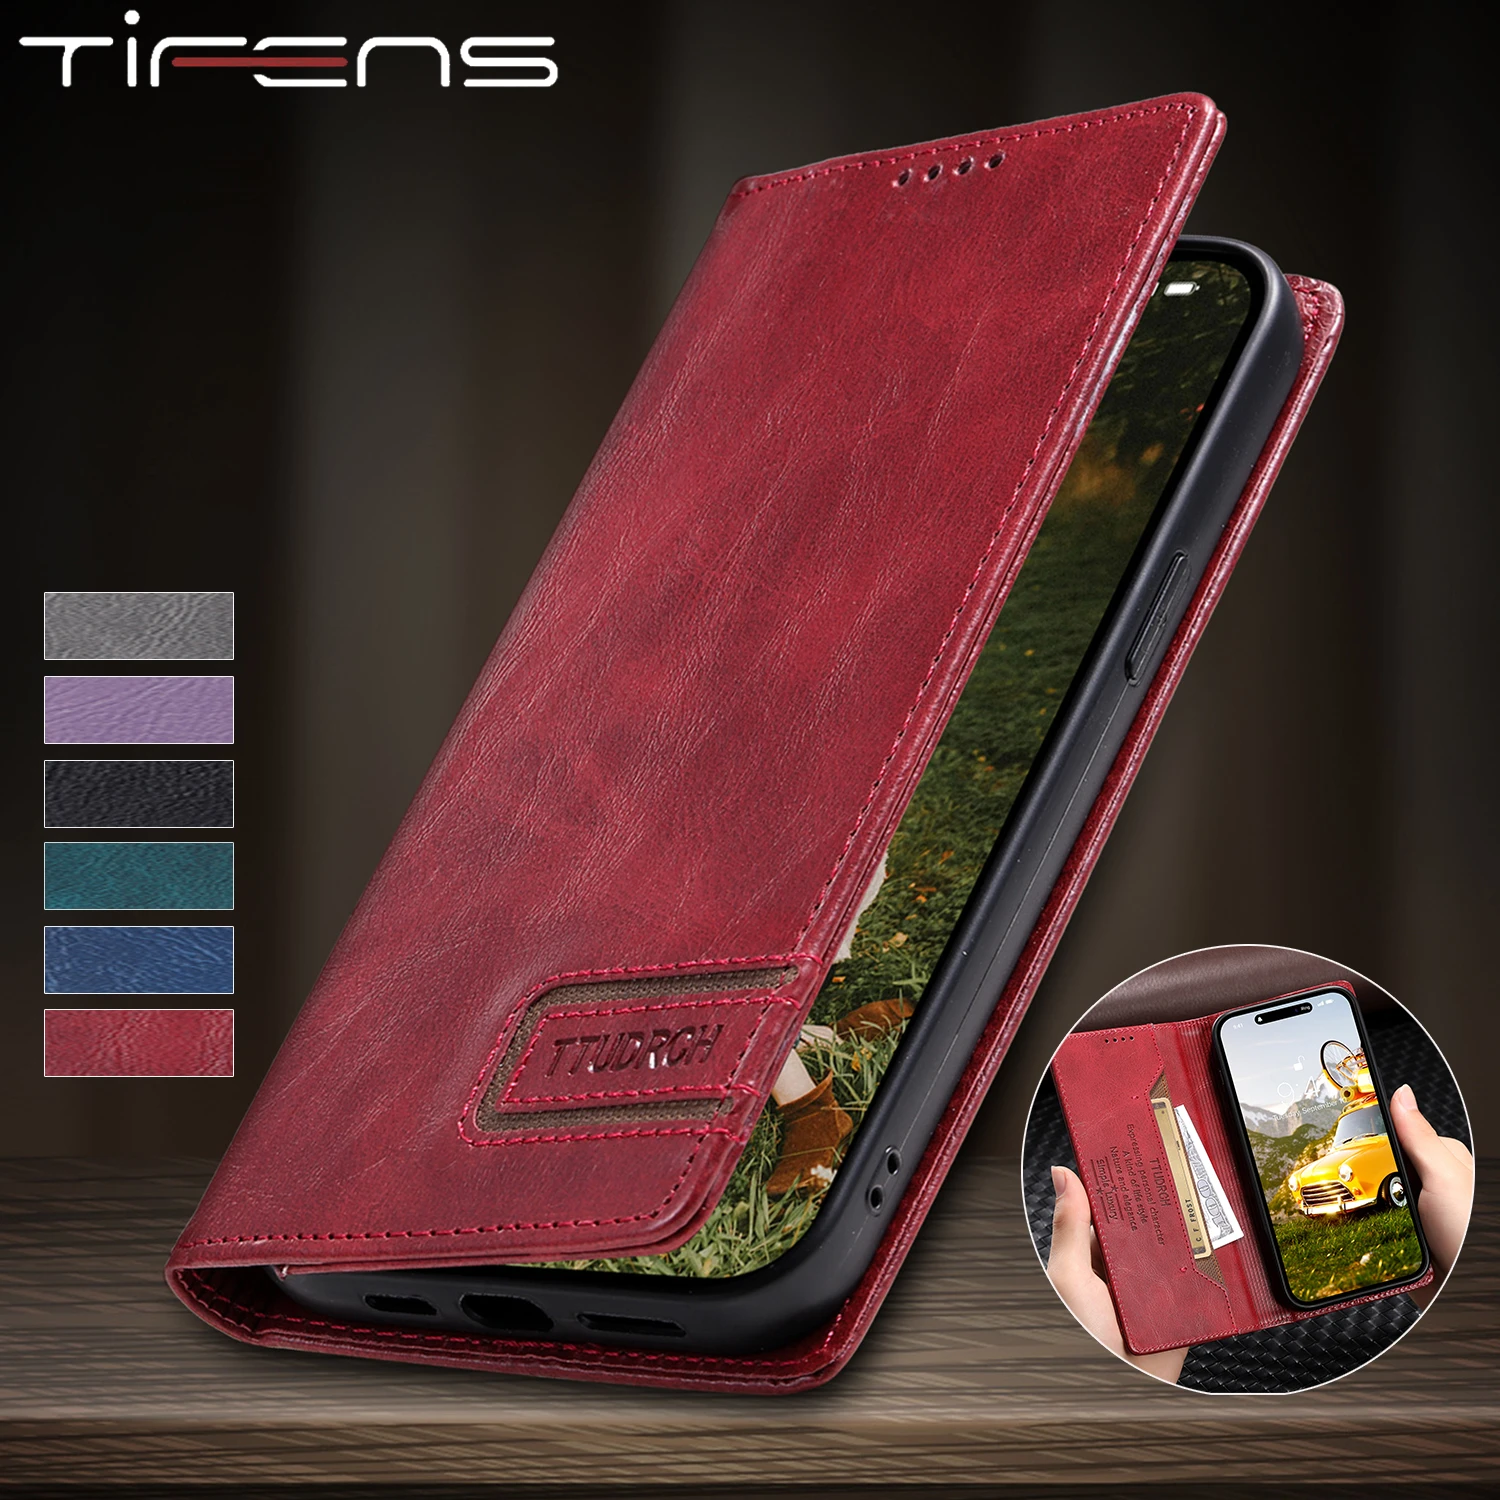 Zipper Flip Wallet Case For iPhone 13 12 Miin 11 Pro Max SE 2020 Magnetic Leather Cover For iPhone XS XR X 6 6s 7 8 Plus Coque